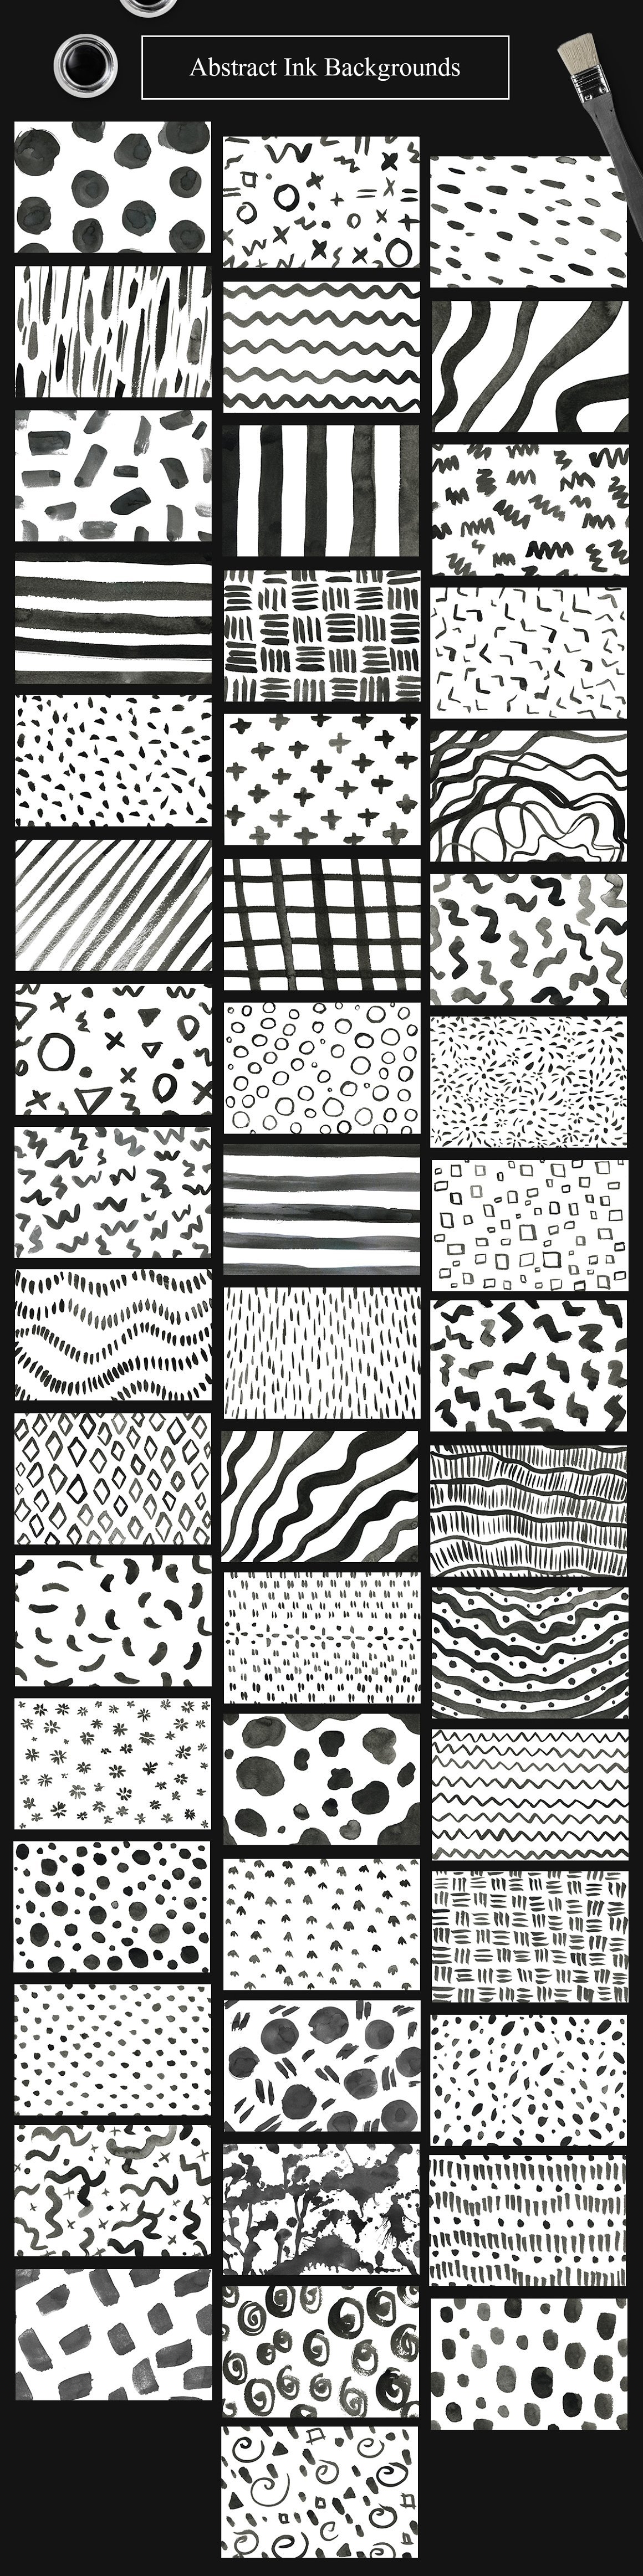 110 Abstract Ink Backgrounds